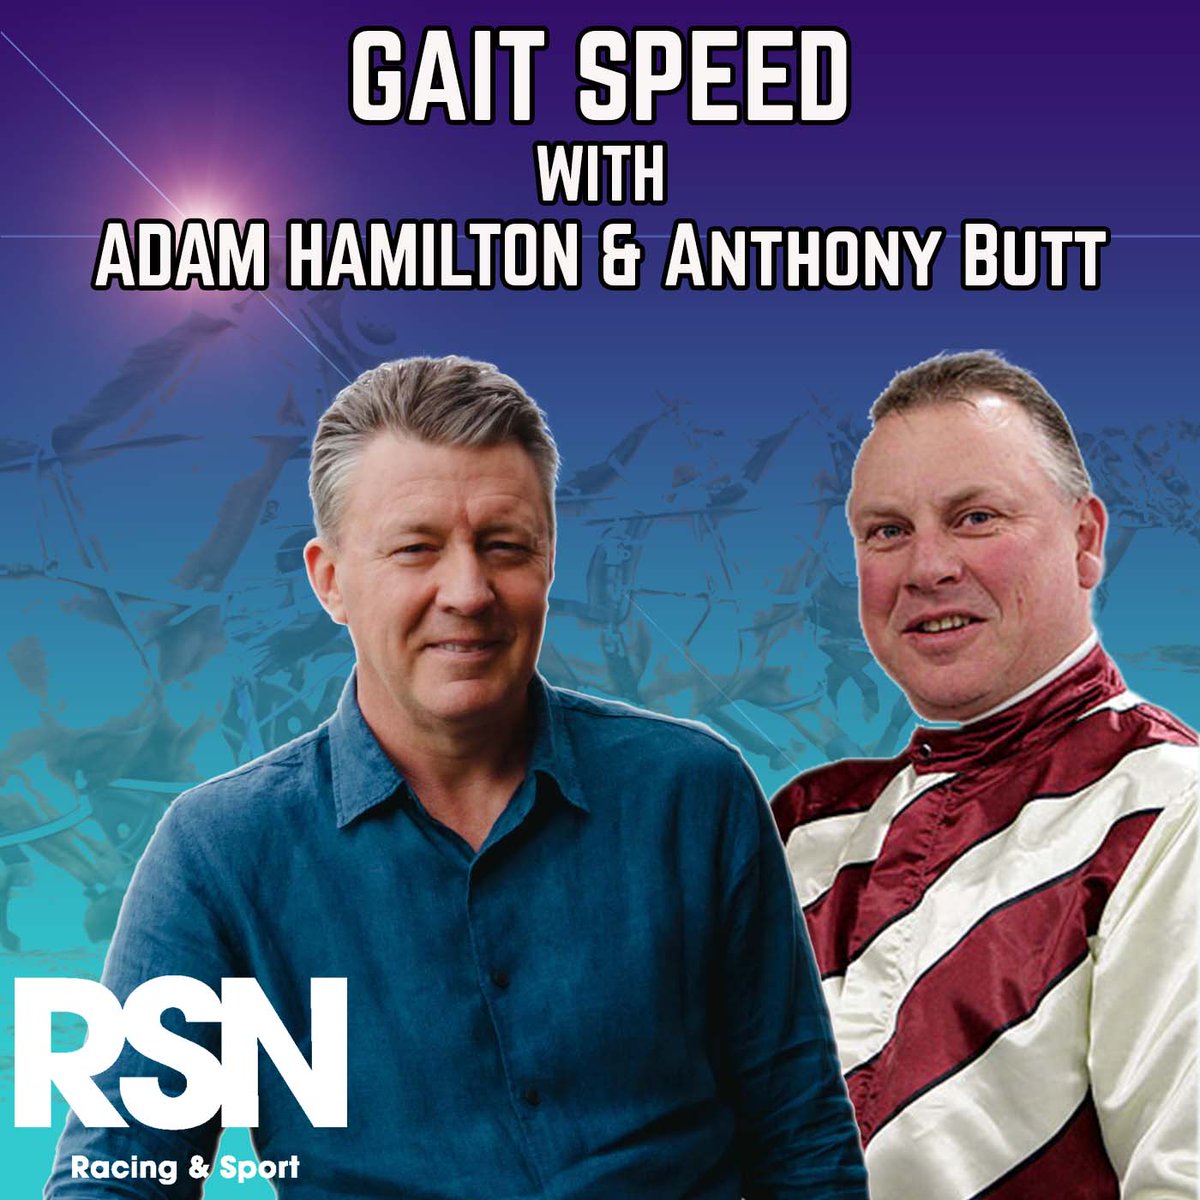 🐴Did you miss #GaitSpeed on #RSNCentral?

Adam Hamilton and Anthony Butt joined Gareth Hall for #GaitSpeed to review all the @TheTrotsComAu action from across Australia this weekend which included the Group 1 Blacks A Fake at Albion Park

🎧 bit.ly/3b6ecGj